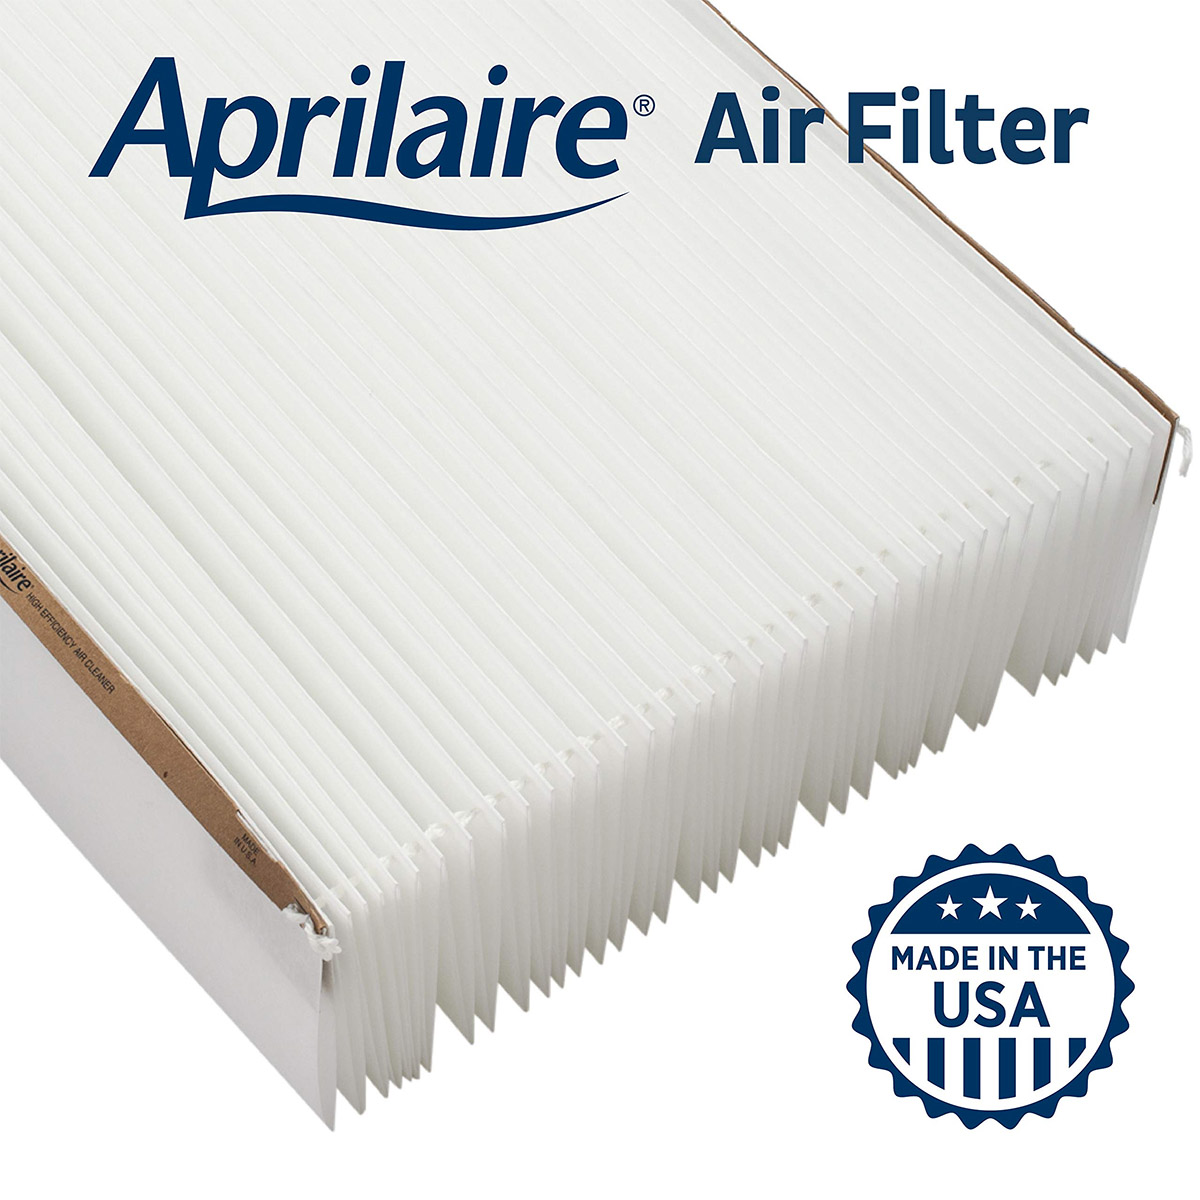 Buy AprilAire Air Filters